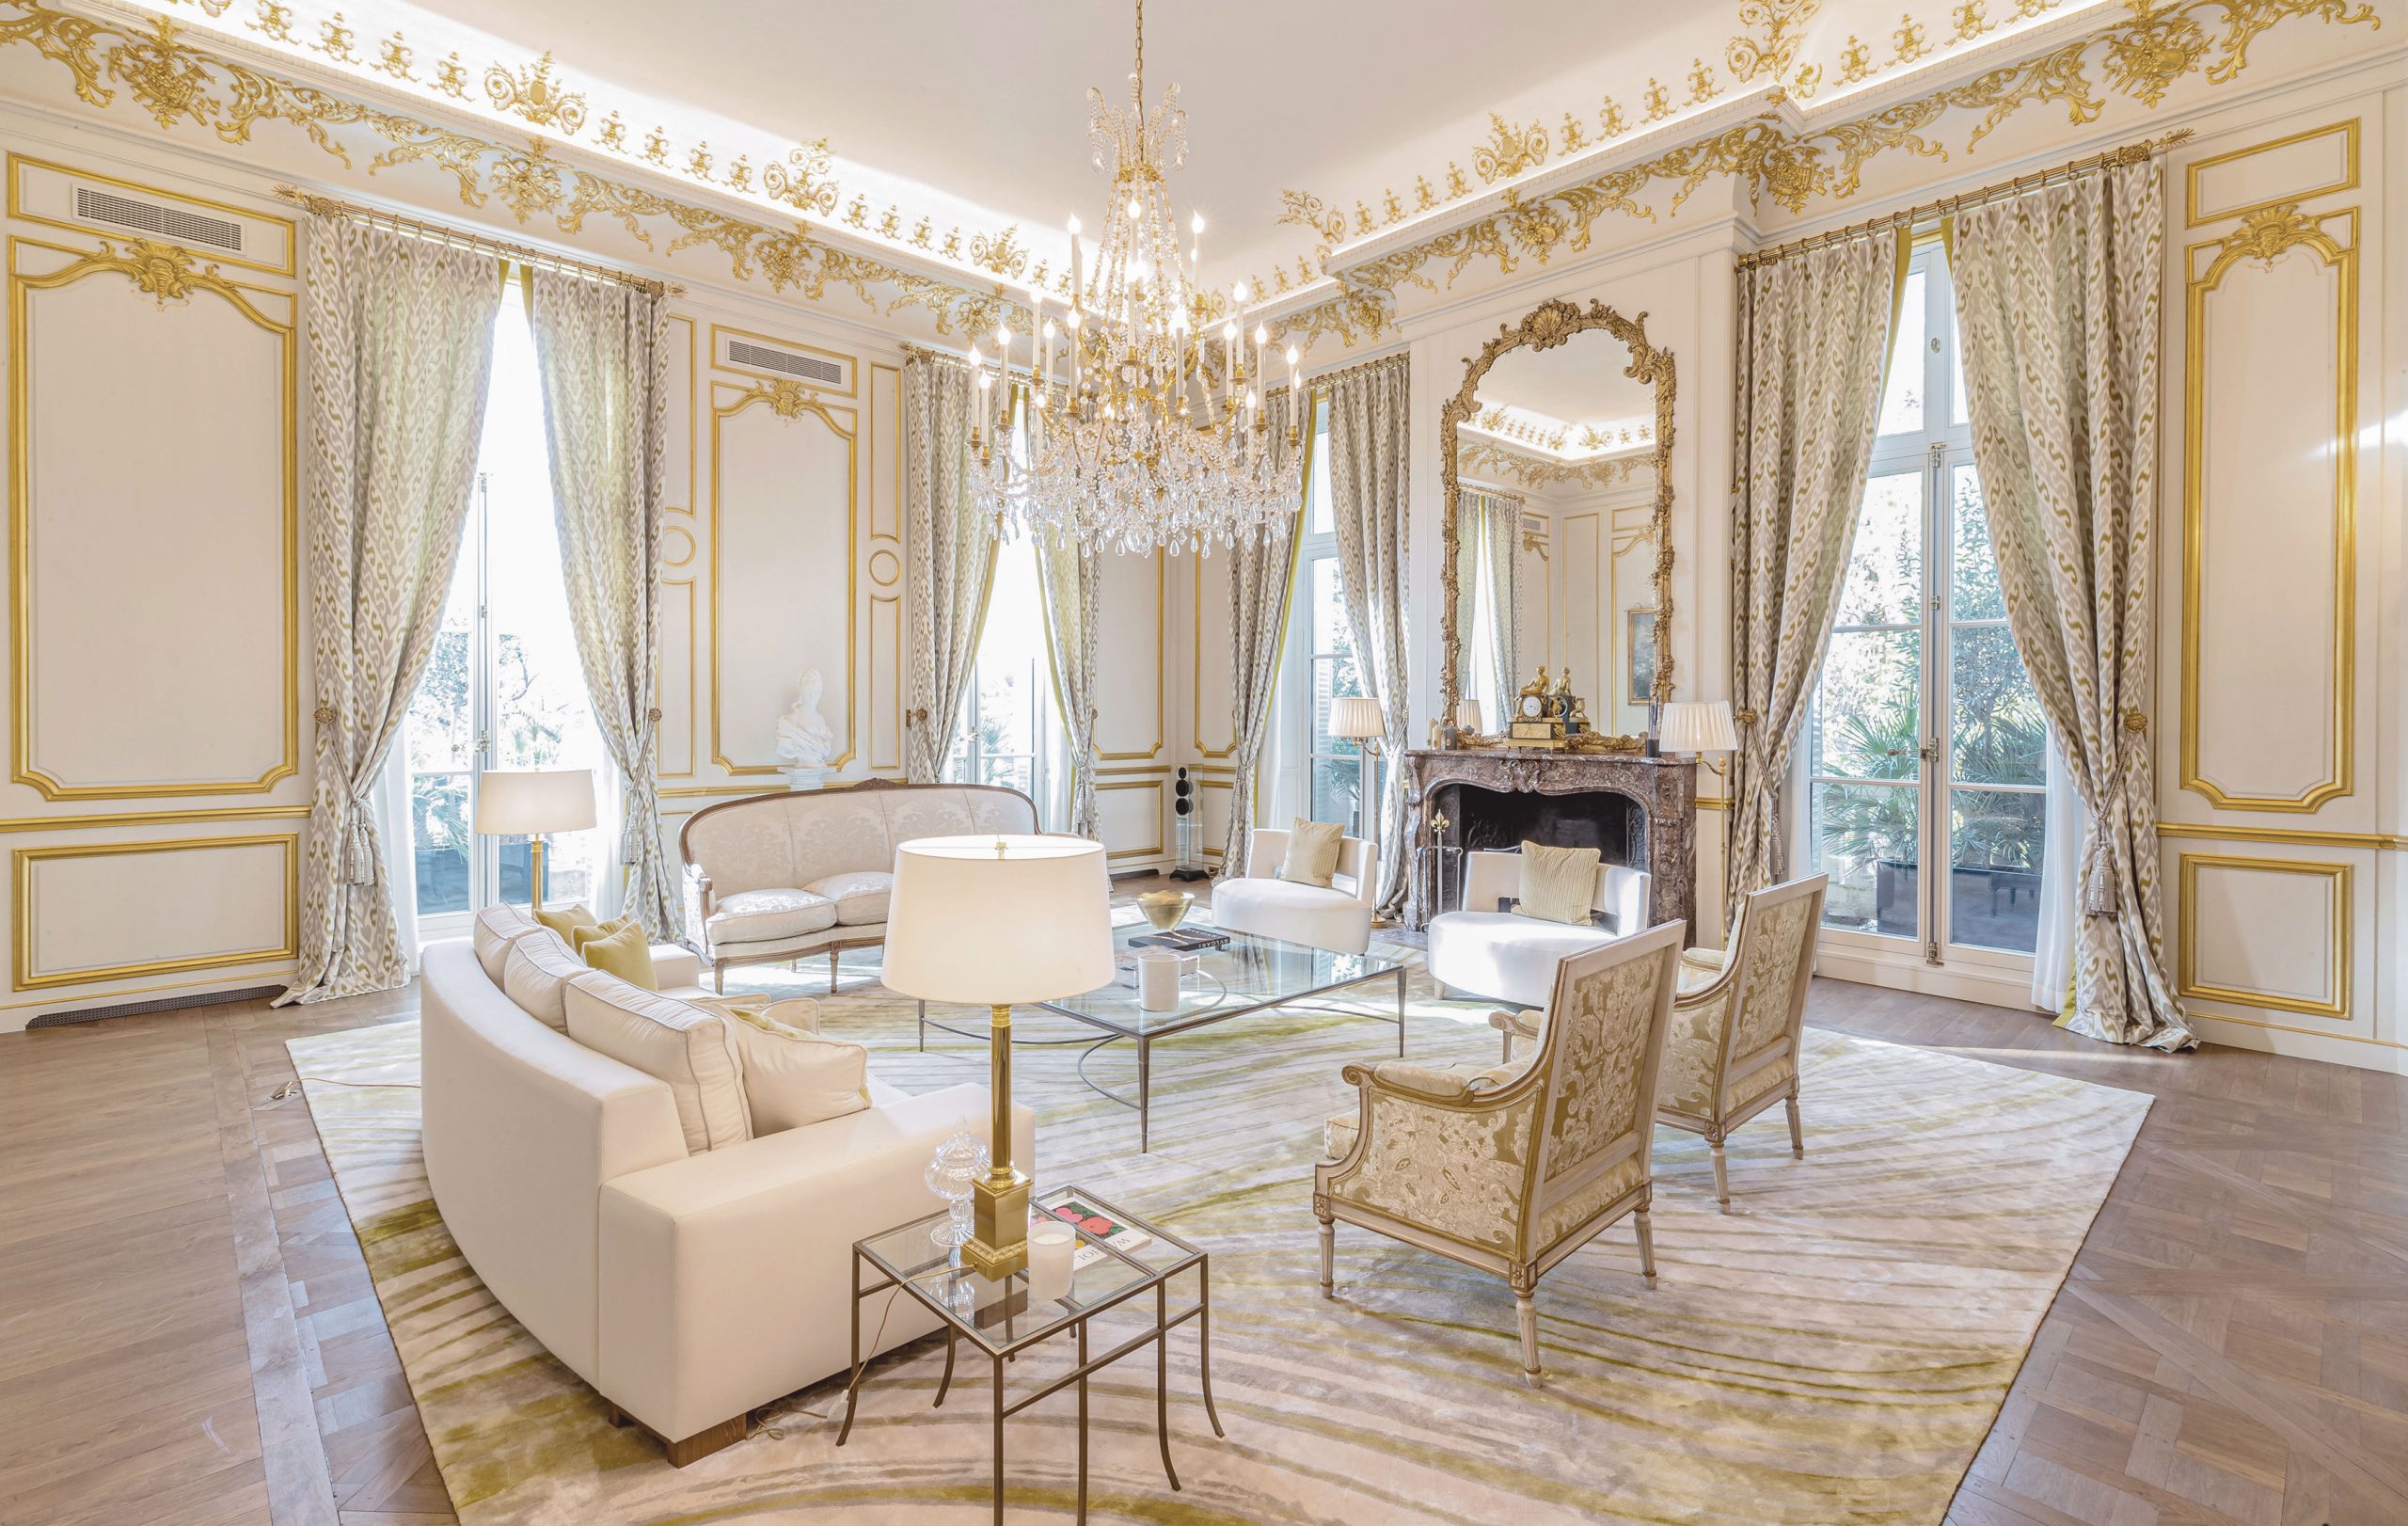 Haute Couture Homes: The Influence Of French Fashion On Interiors